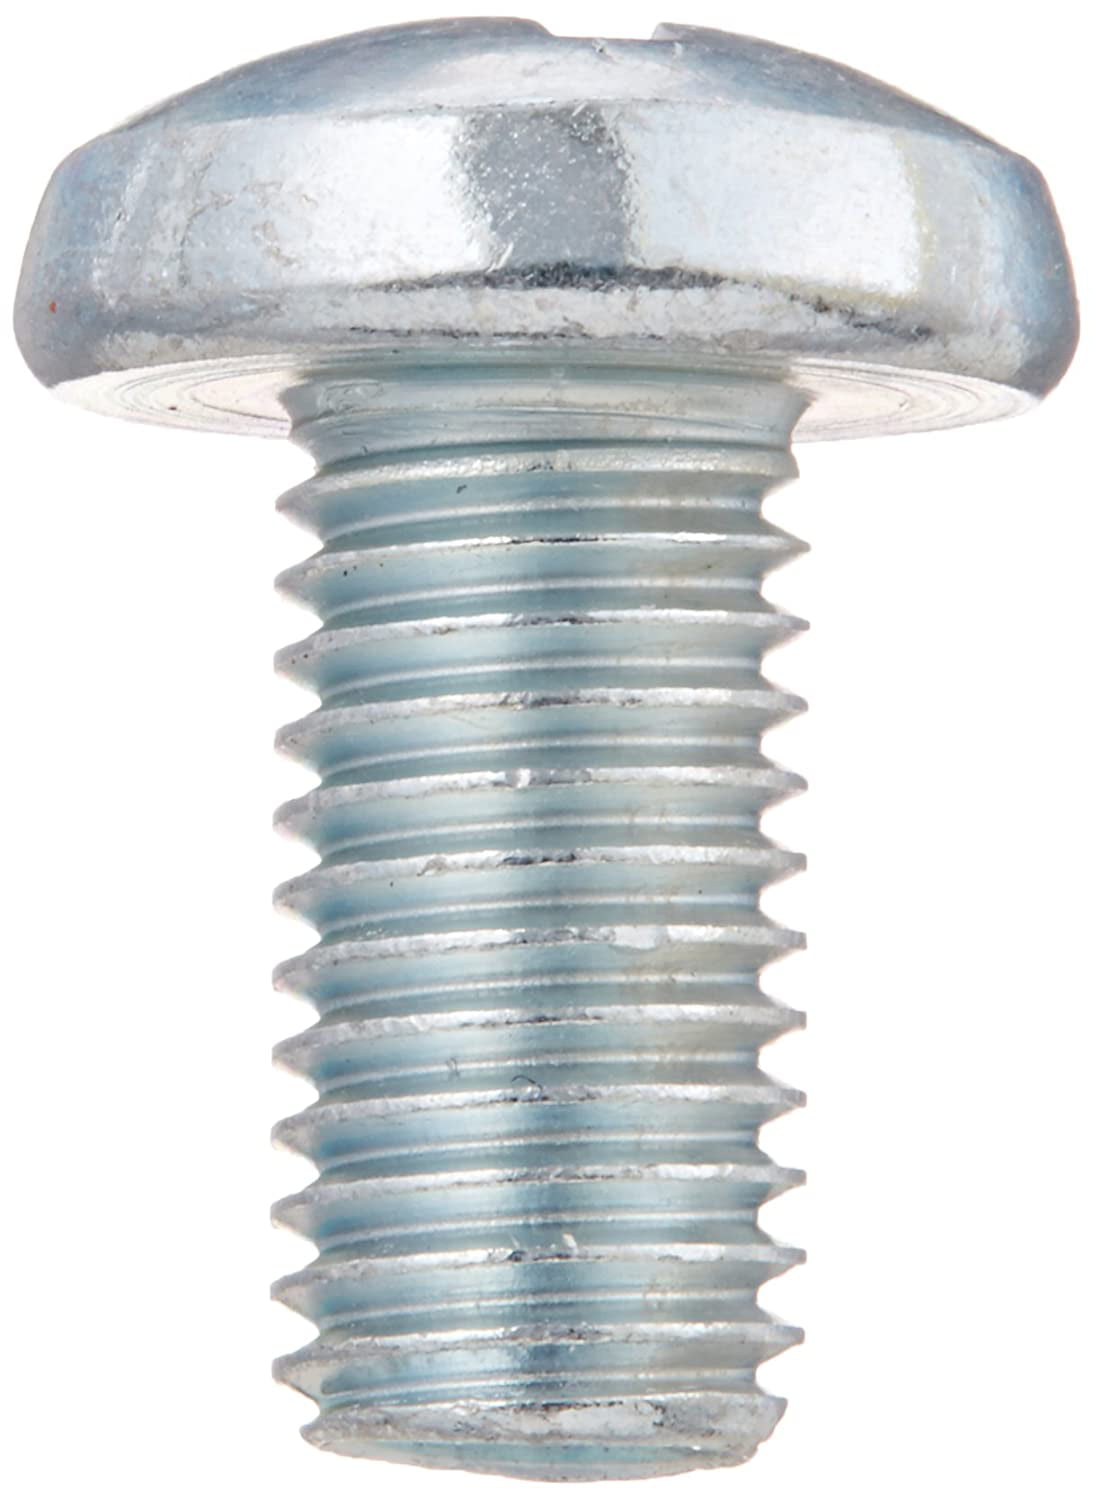 1/4 Length Small Parts 588055-PR Fully Threaded Phillips Drive Pack of 100 Steel Machine Screw Meets ASME B18.6.3 Round Head #4-40 UNC Threads 1/4 Length Zinc Plated Finish 